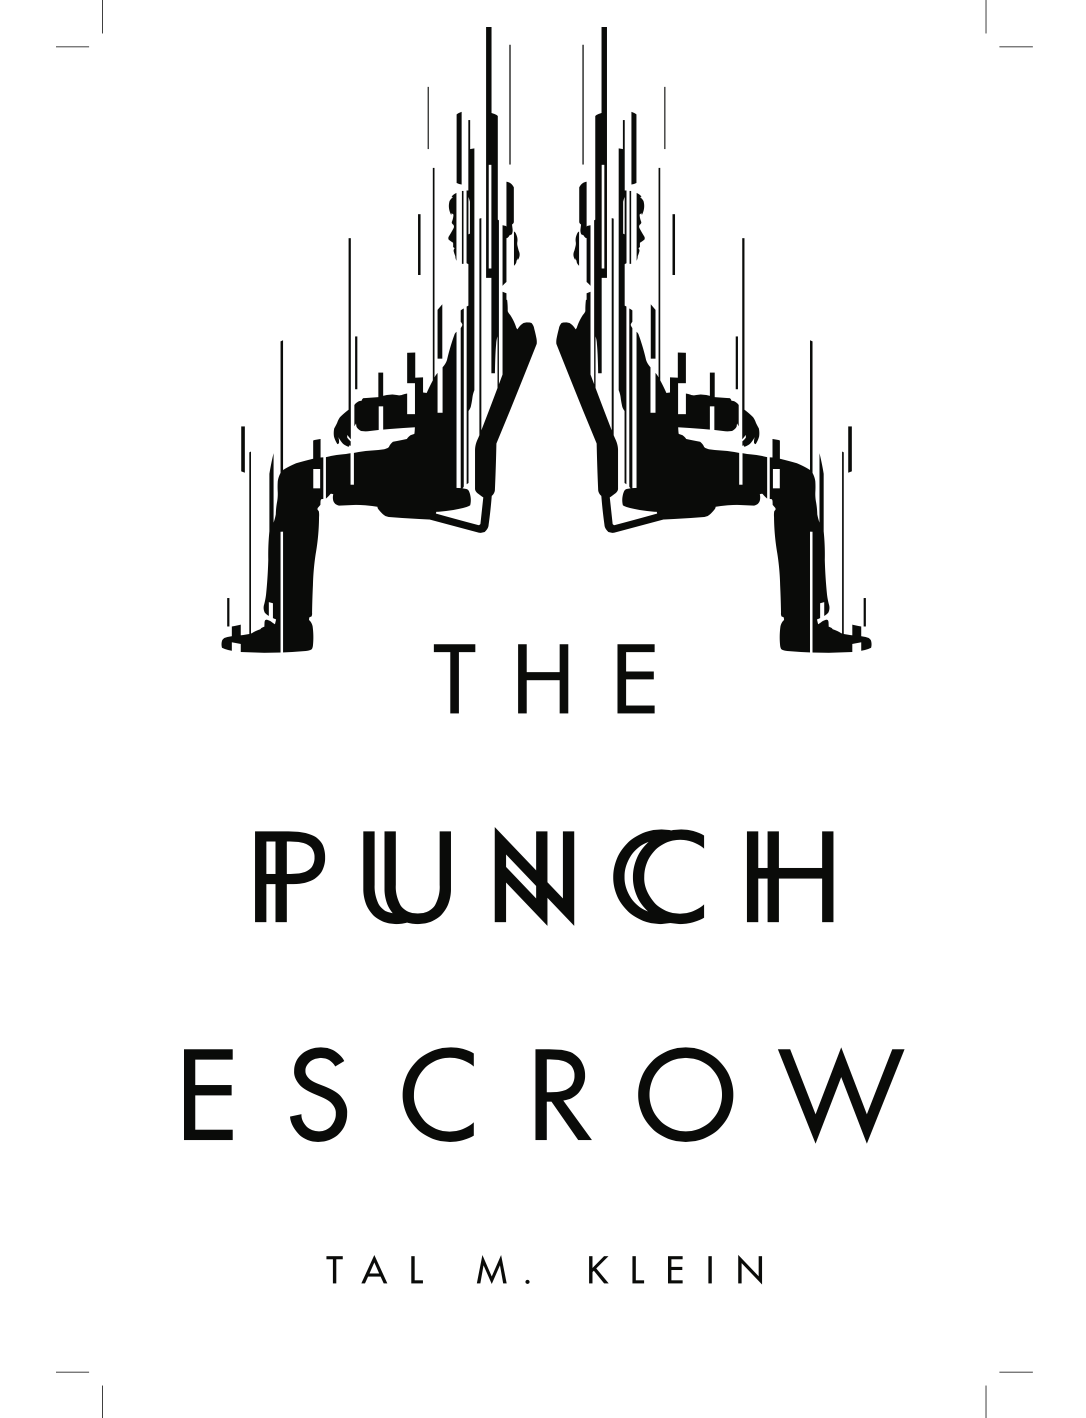 the punch escrow by tal m klein